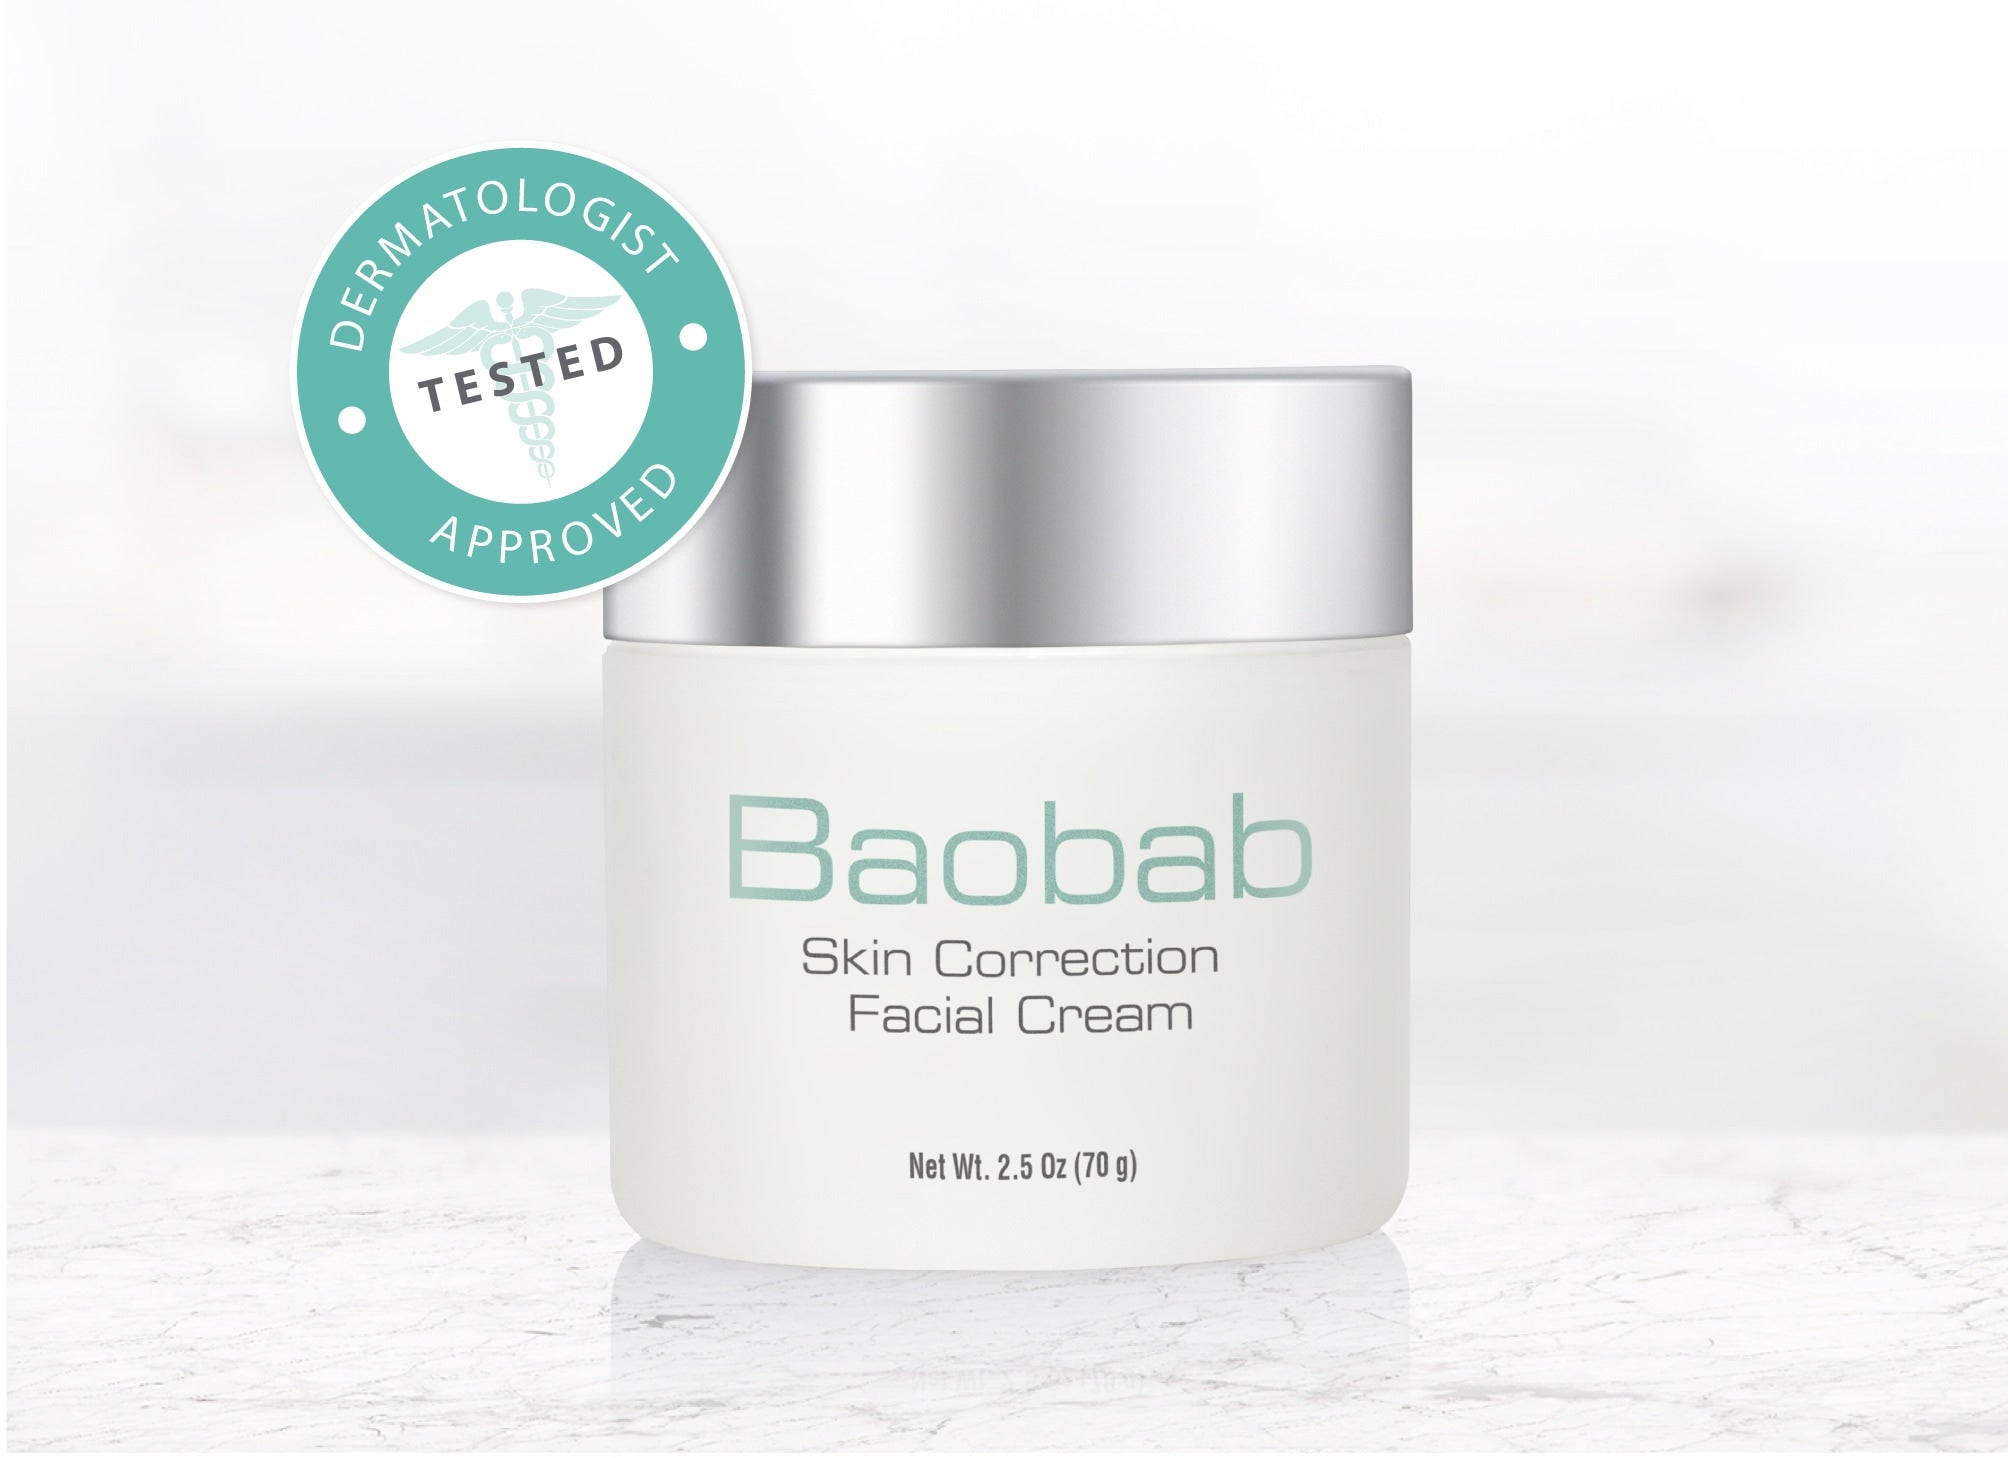 A rendering of the Boabab Skin Correction Facial Cream sitting on a white countertop with a stamp that reads Dermatologist Tested Approved